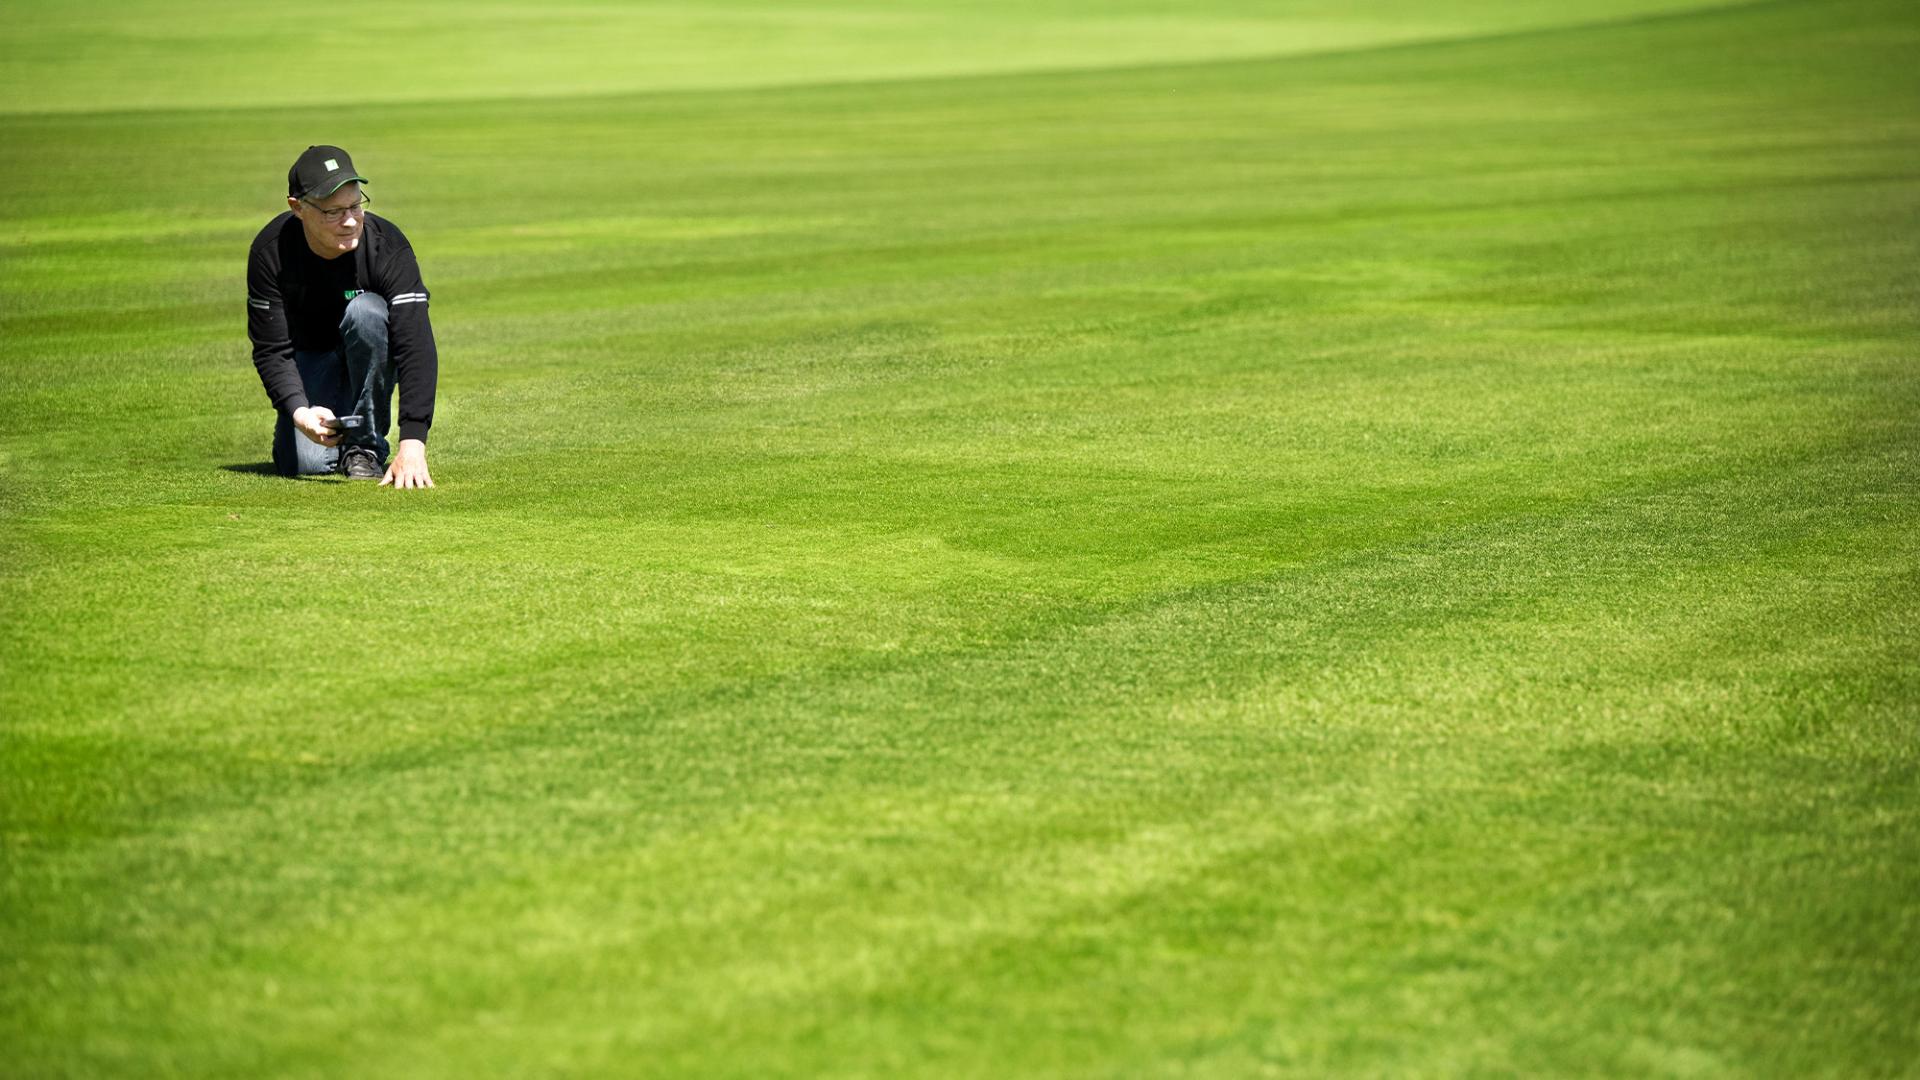 Choose Ecomaster for a joined-up approach to turf care and management